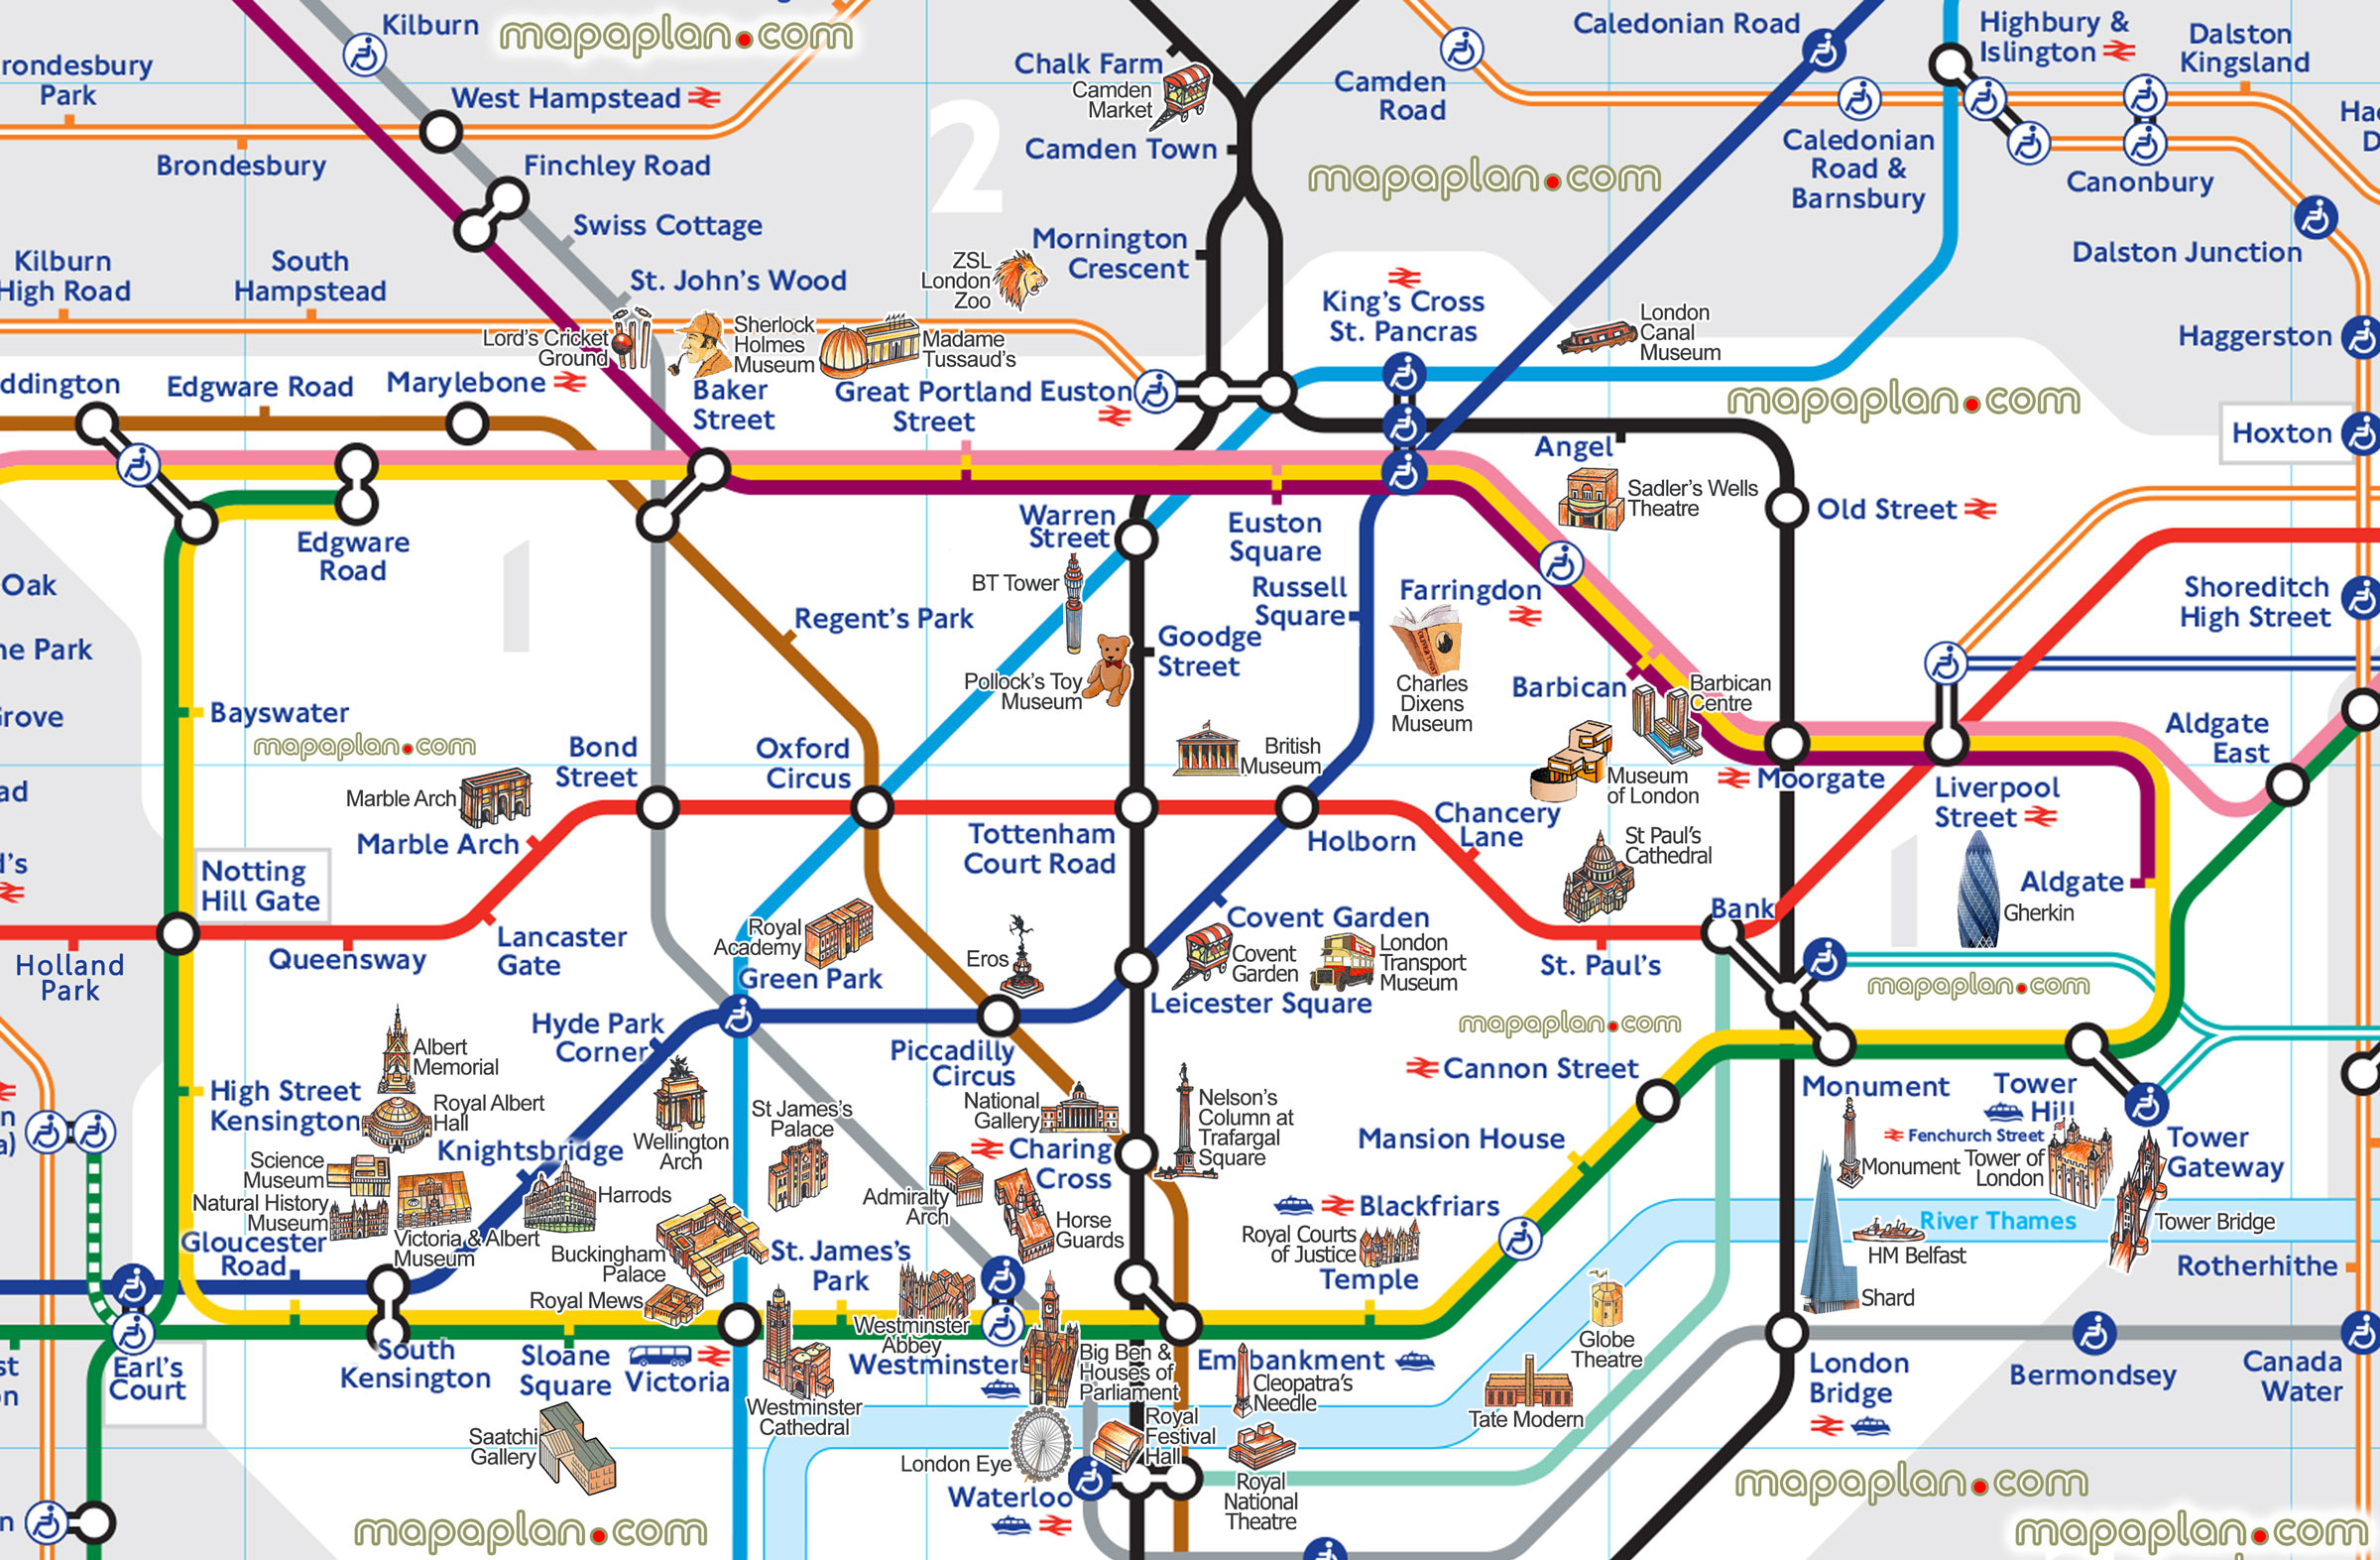 london tube attractions underground stations plan main points interest metro zones landmarks museumss London Top tourist attractions map